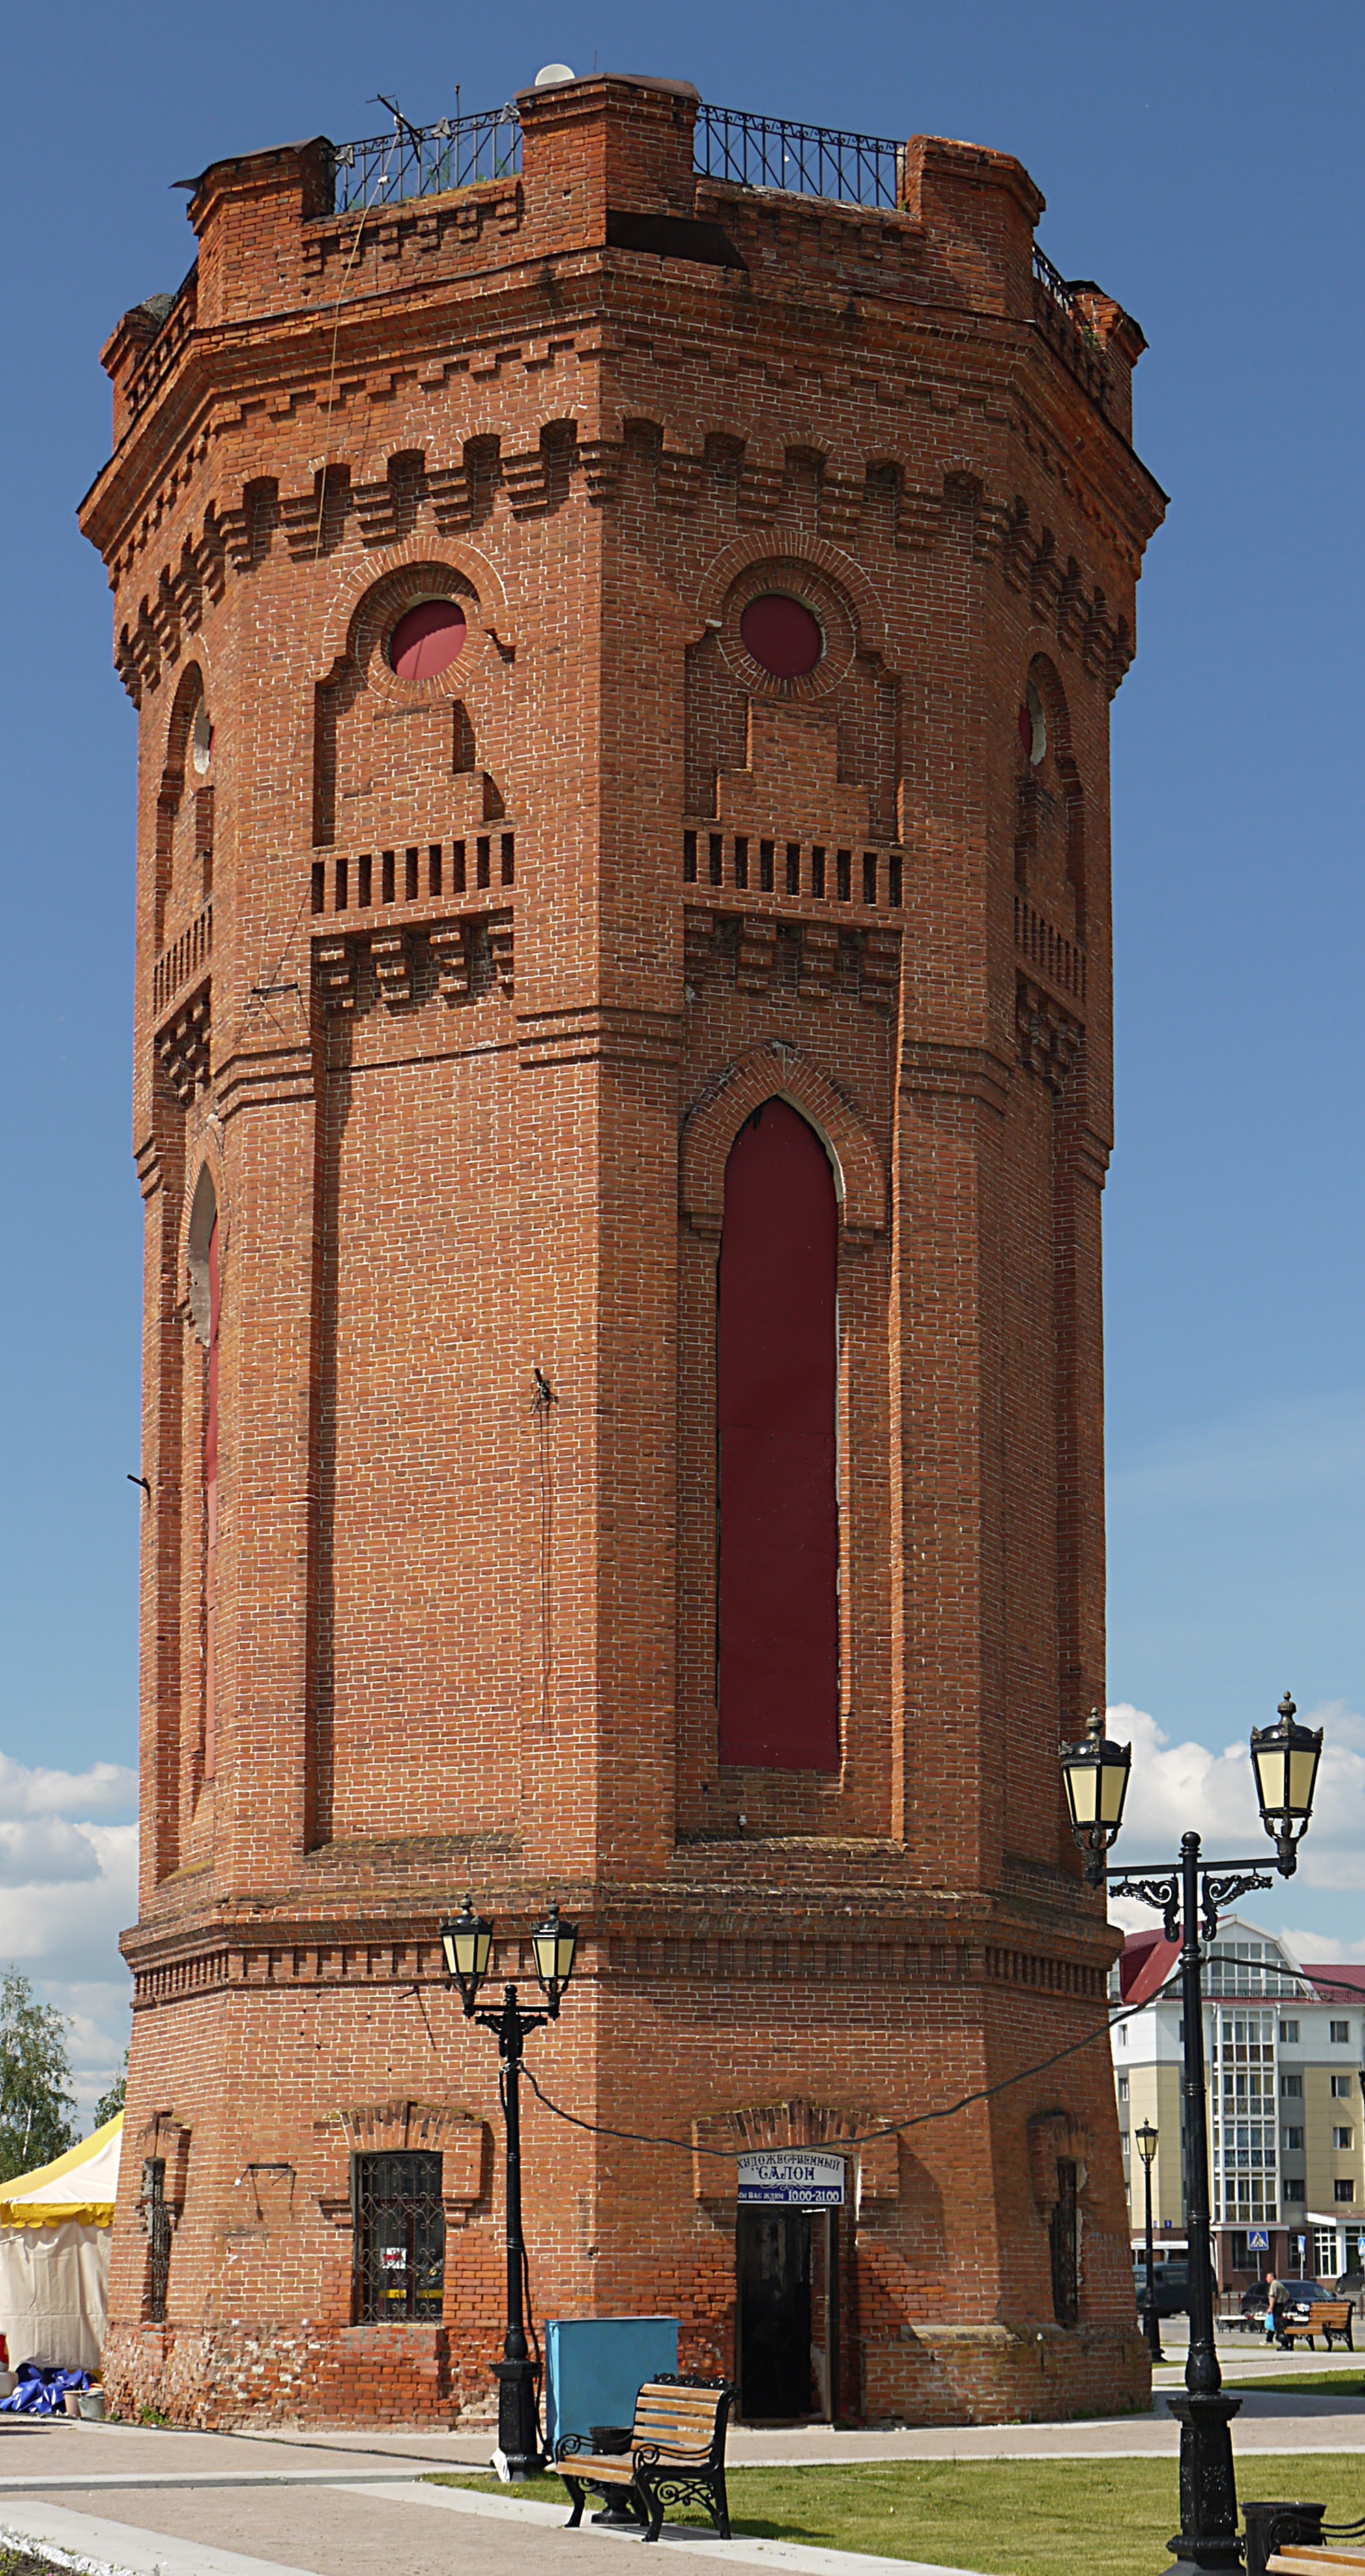 The water tower on Remezov Square1